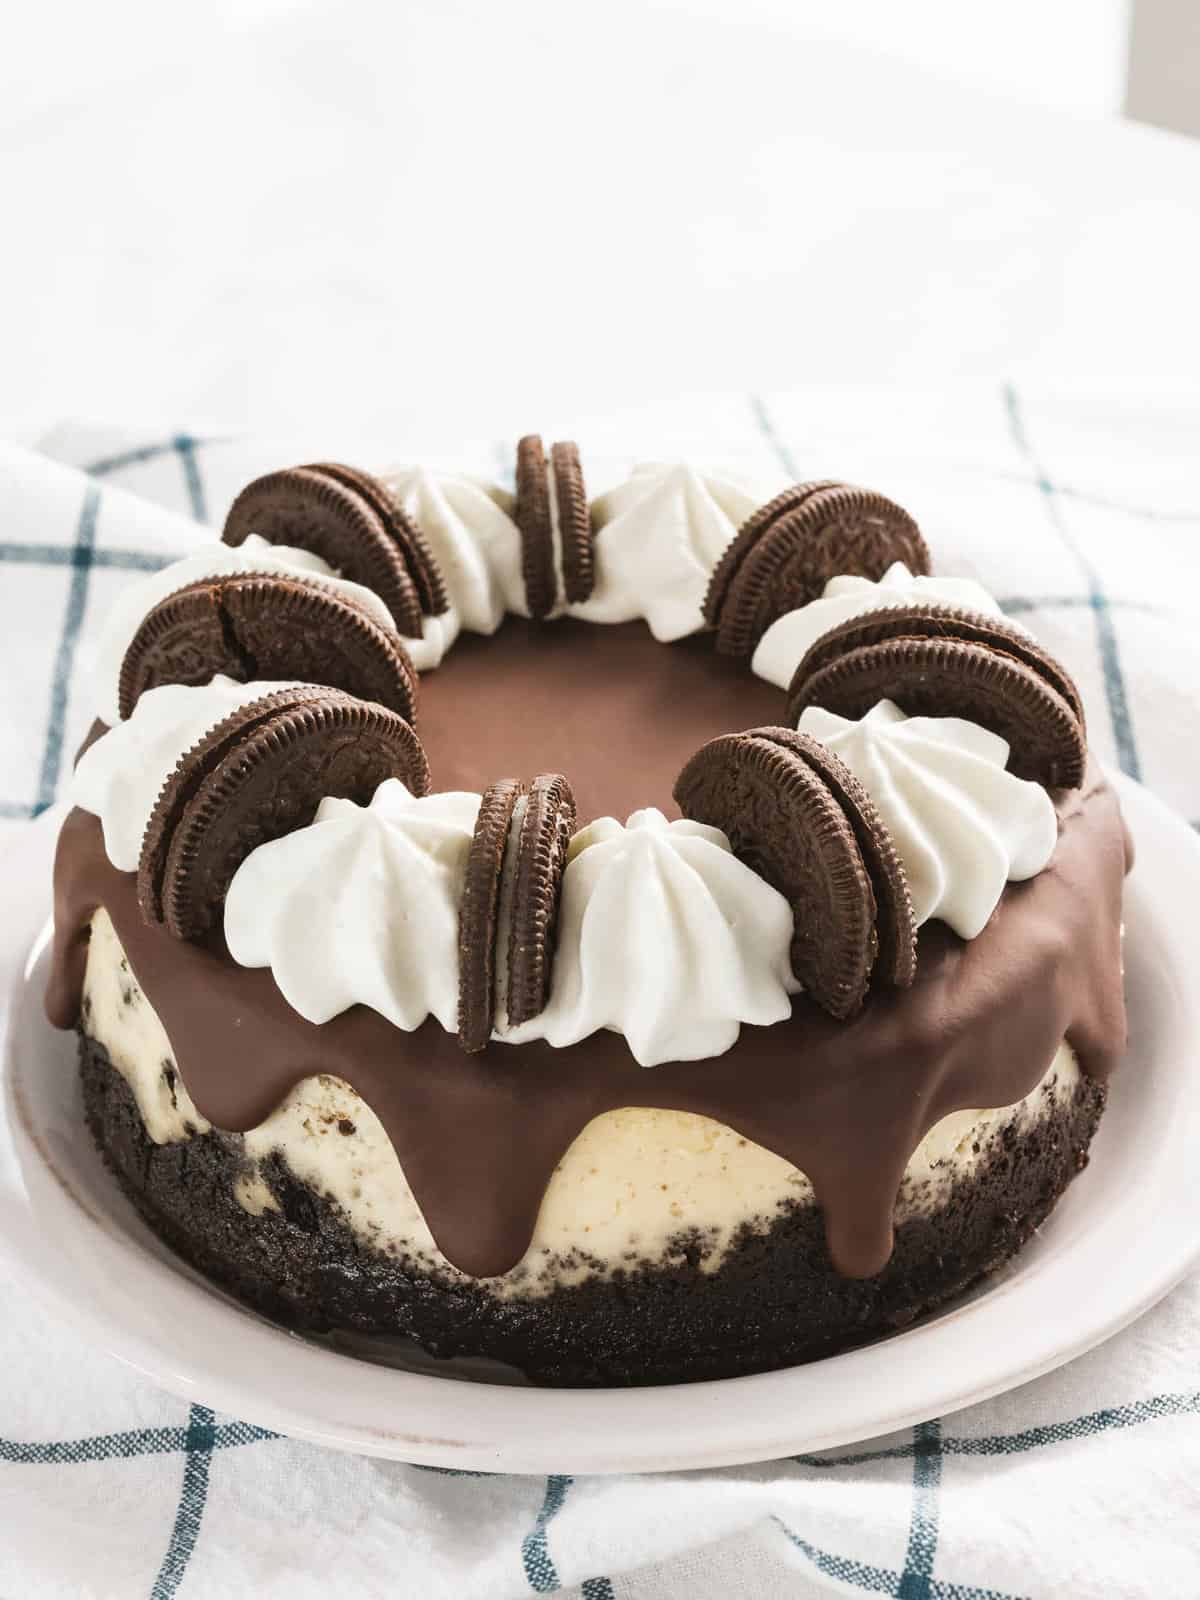 Oreo cheesecake decorated with Oreo cookies, whipped cream, and ganache.